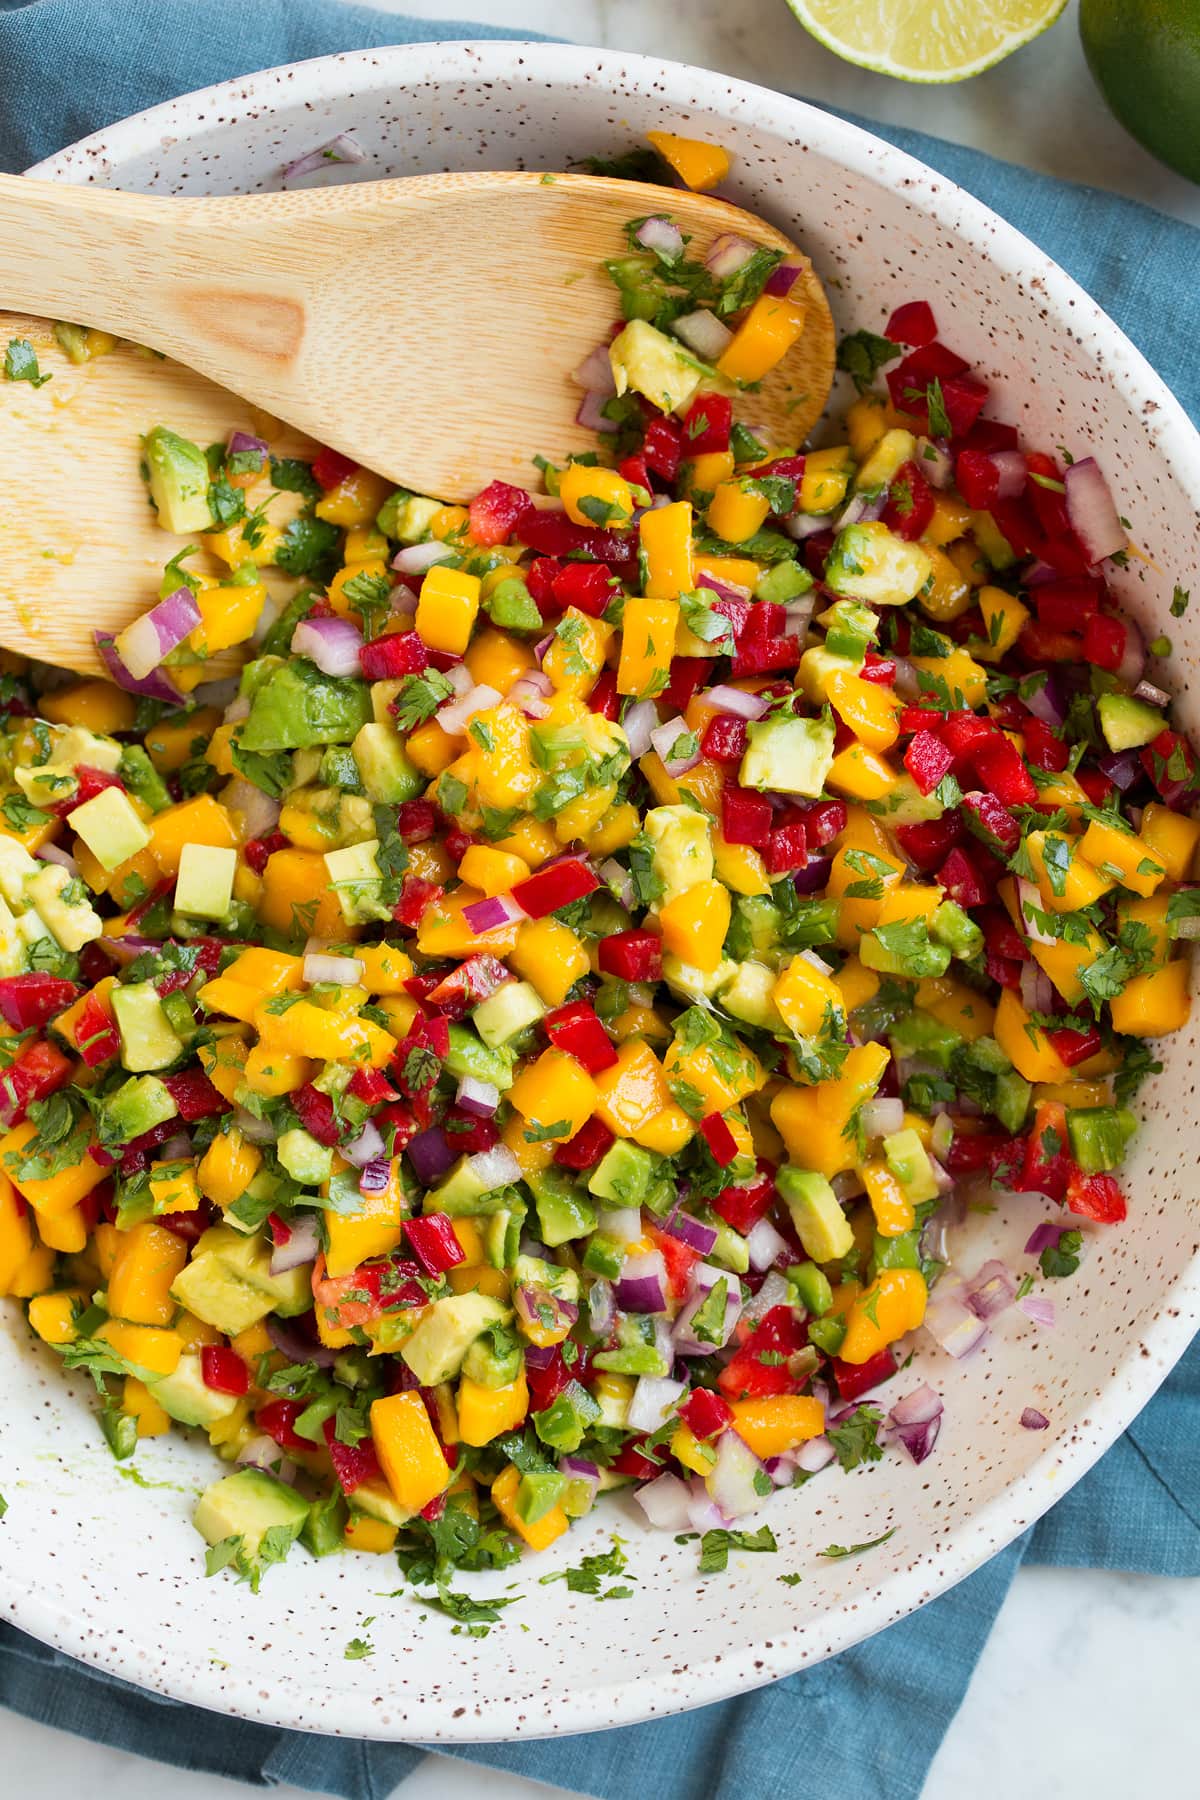 Close up image of mango salsa shown after tossing ingredients.